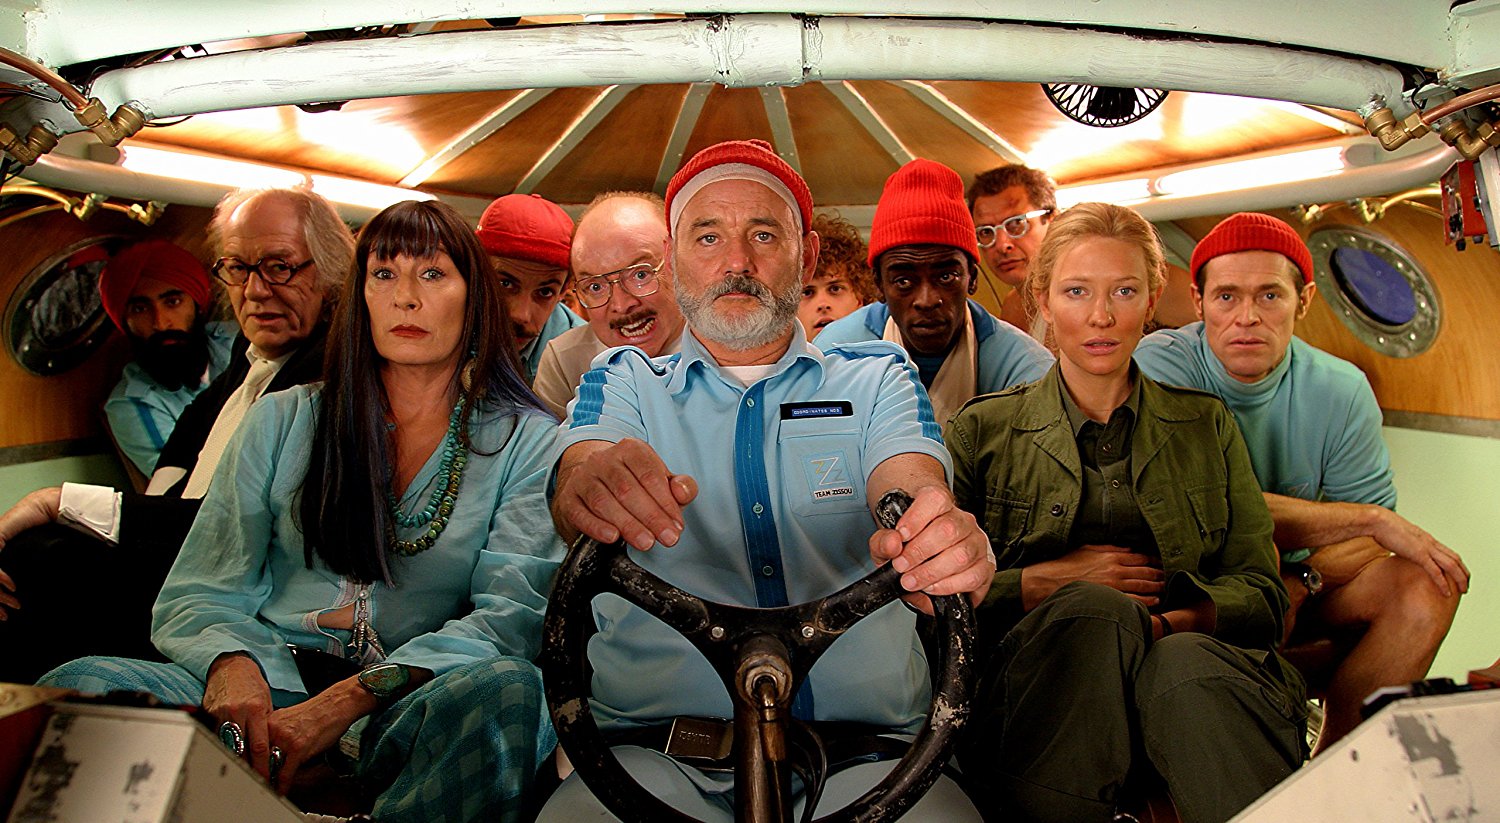 Source: The Life Aquatic with Steve Zissou by Wes Anderson